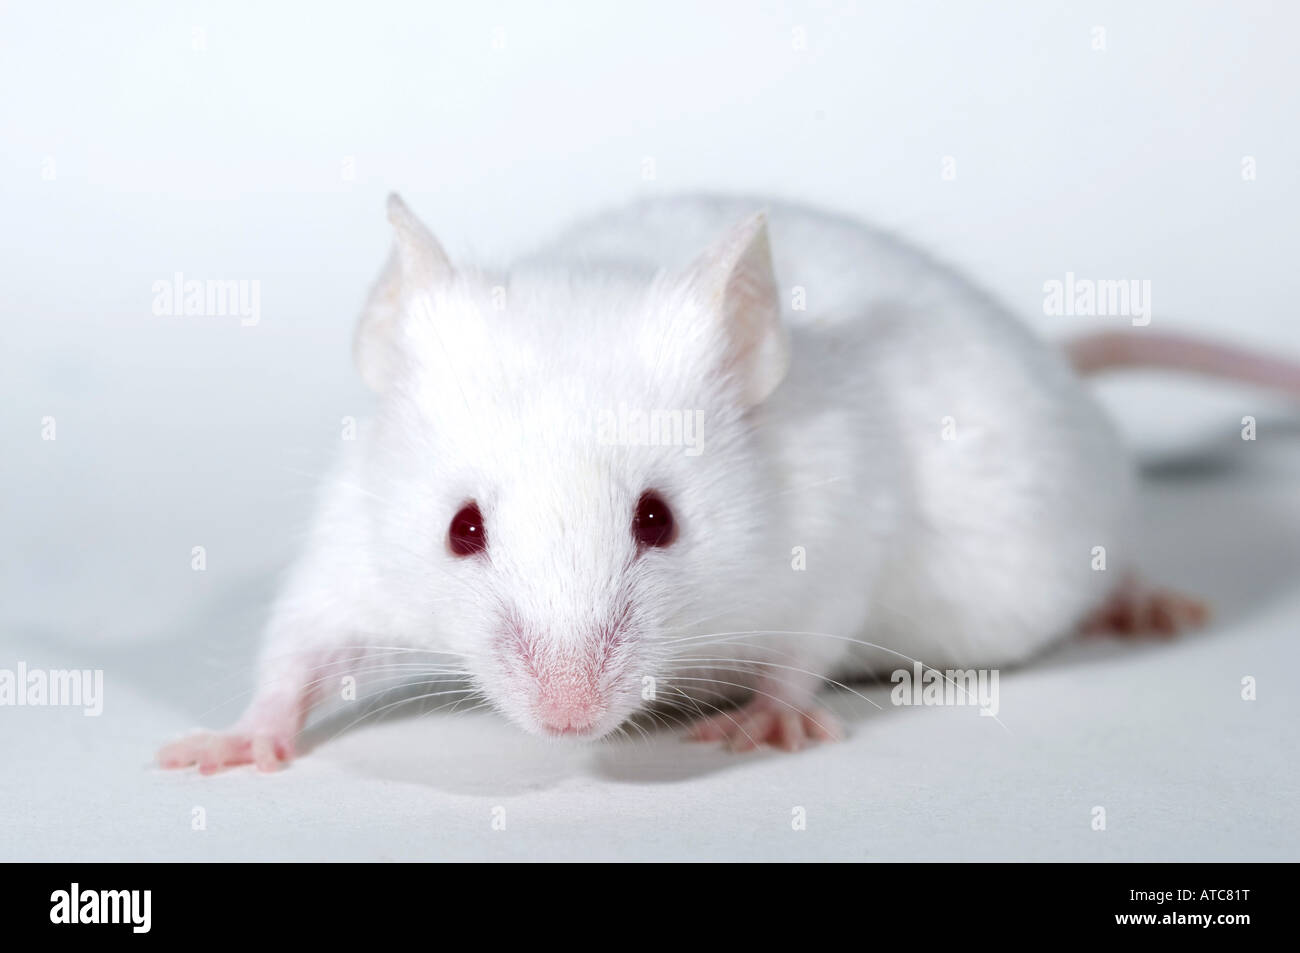 house mouse (Mus musculus), albino mouseon white subsurface, captive Stock Photo